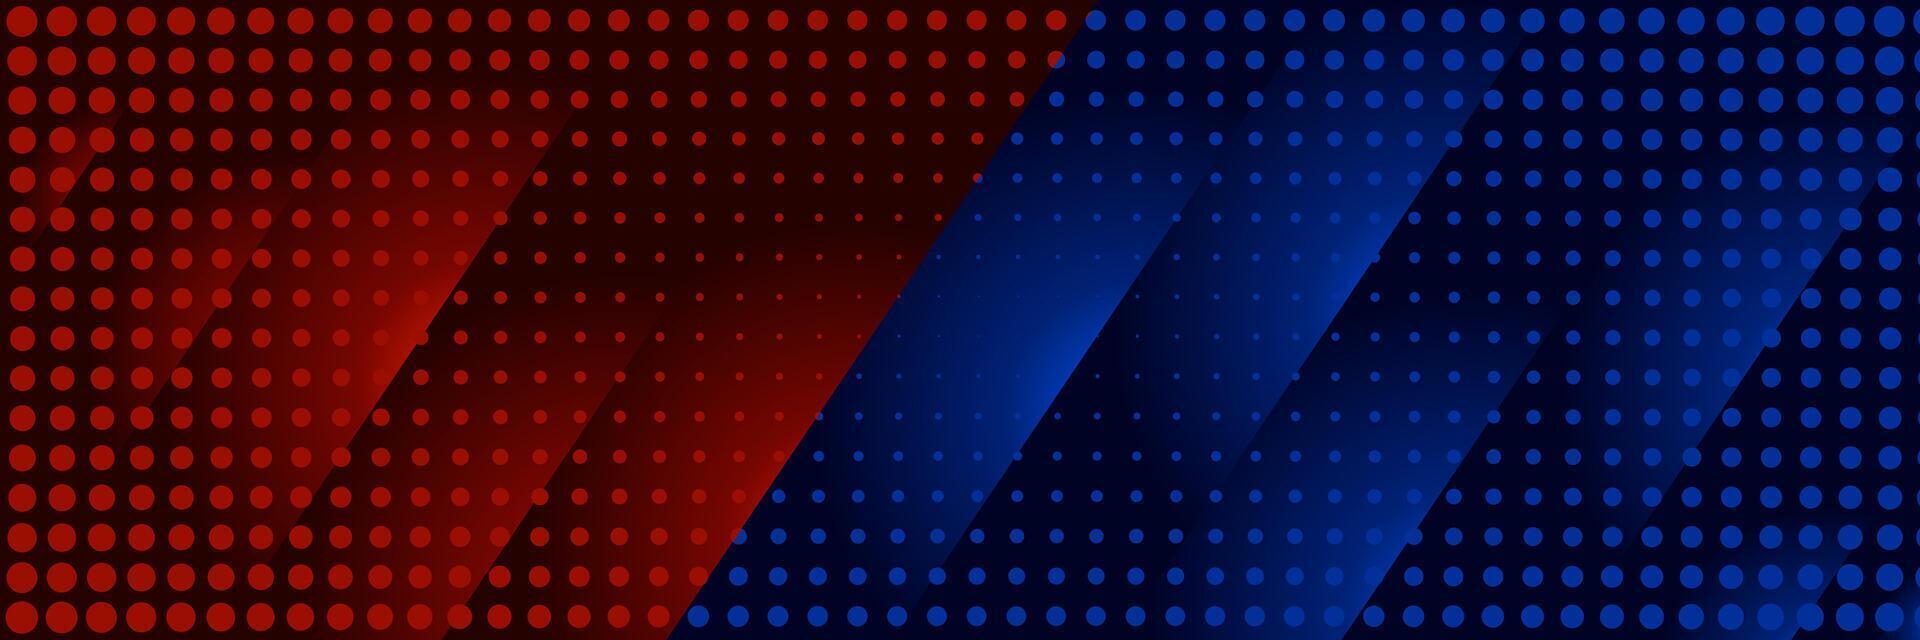 abstract creative elegant red and blue background with halftone vector